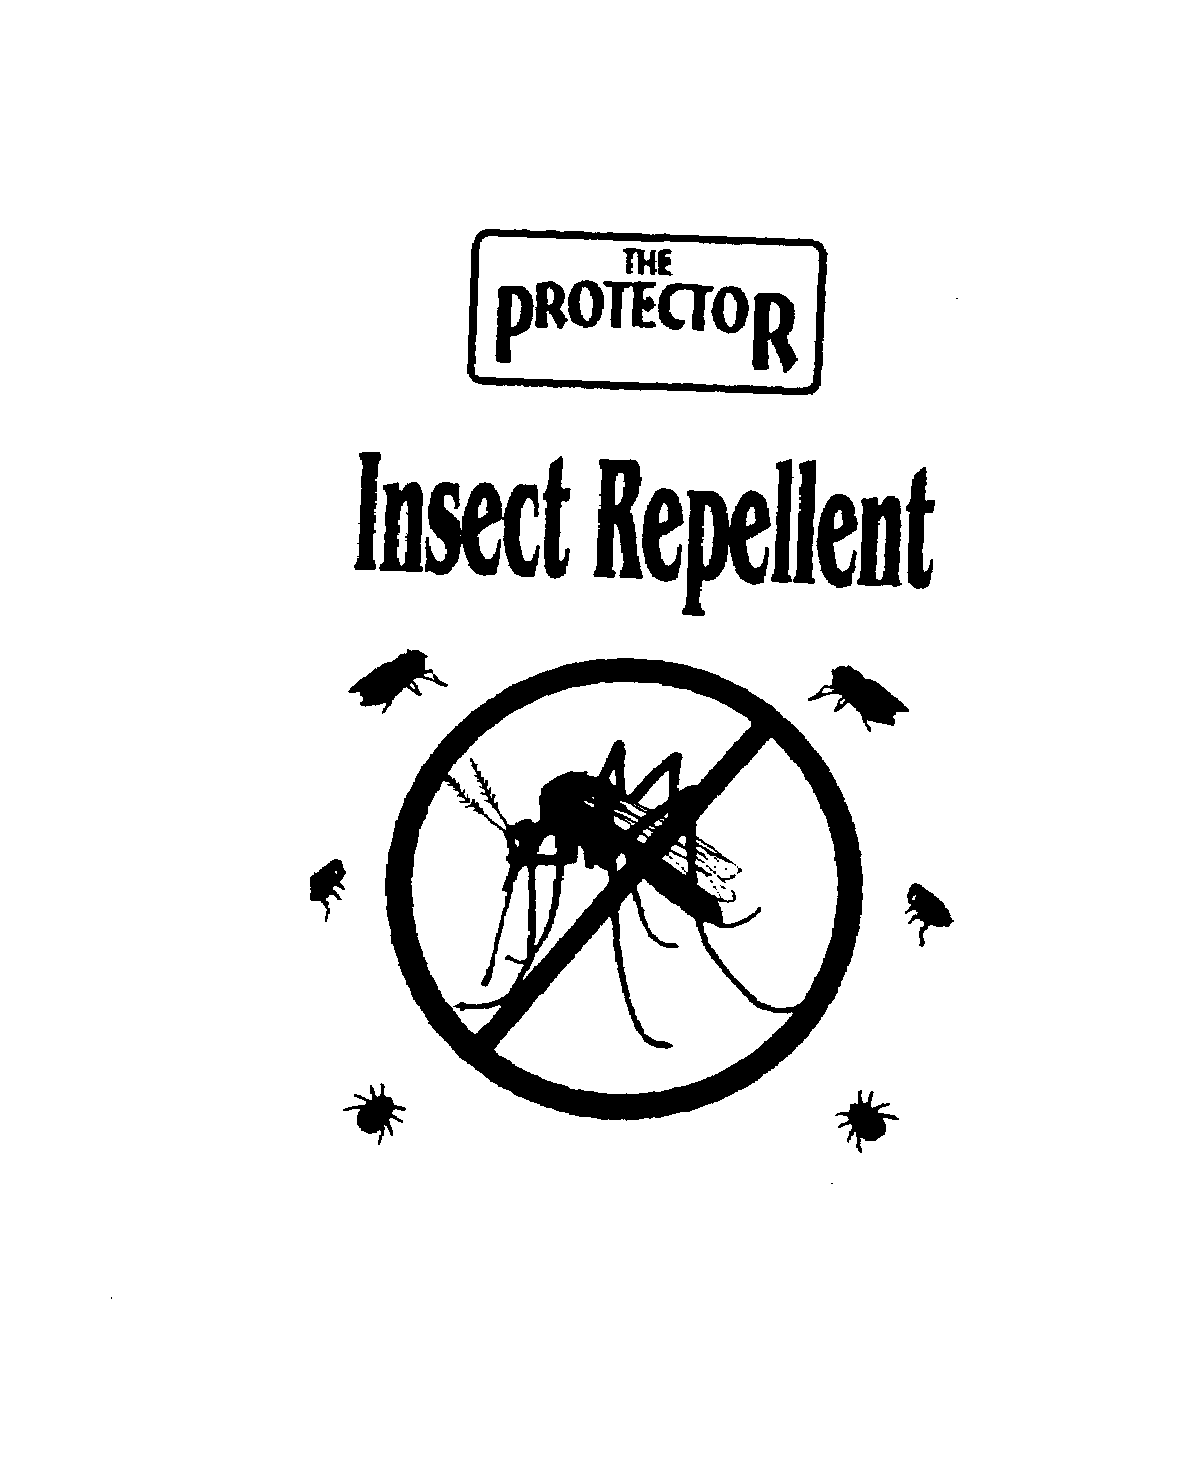  THE PROTECTOR INSECT REPELLENT